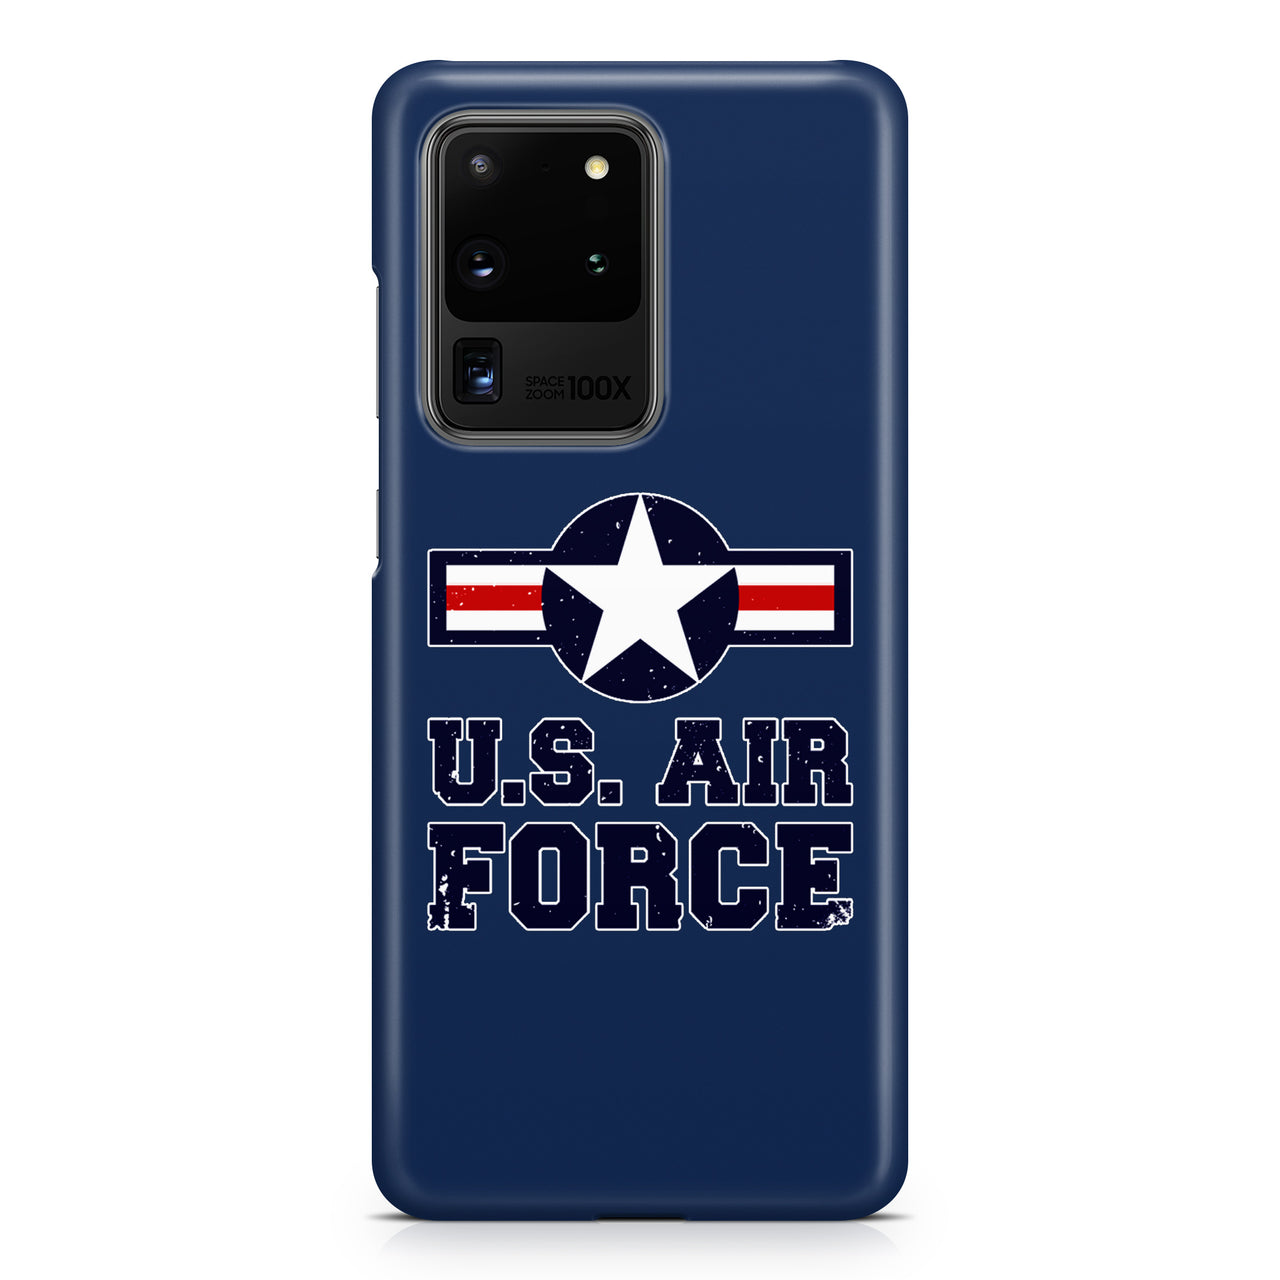 US Air Force Samsung A Cases